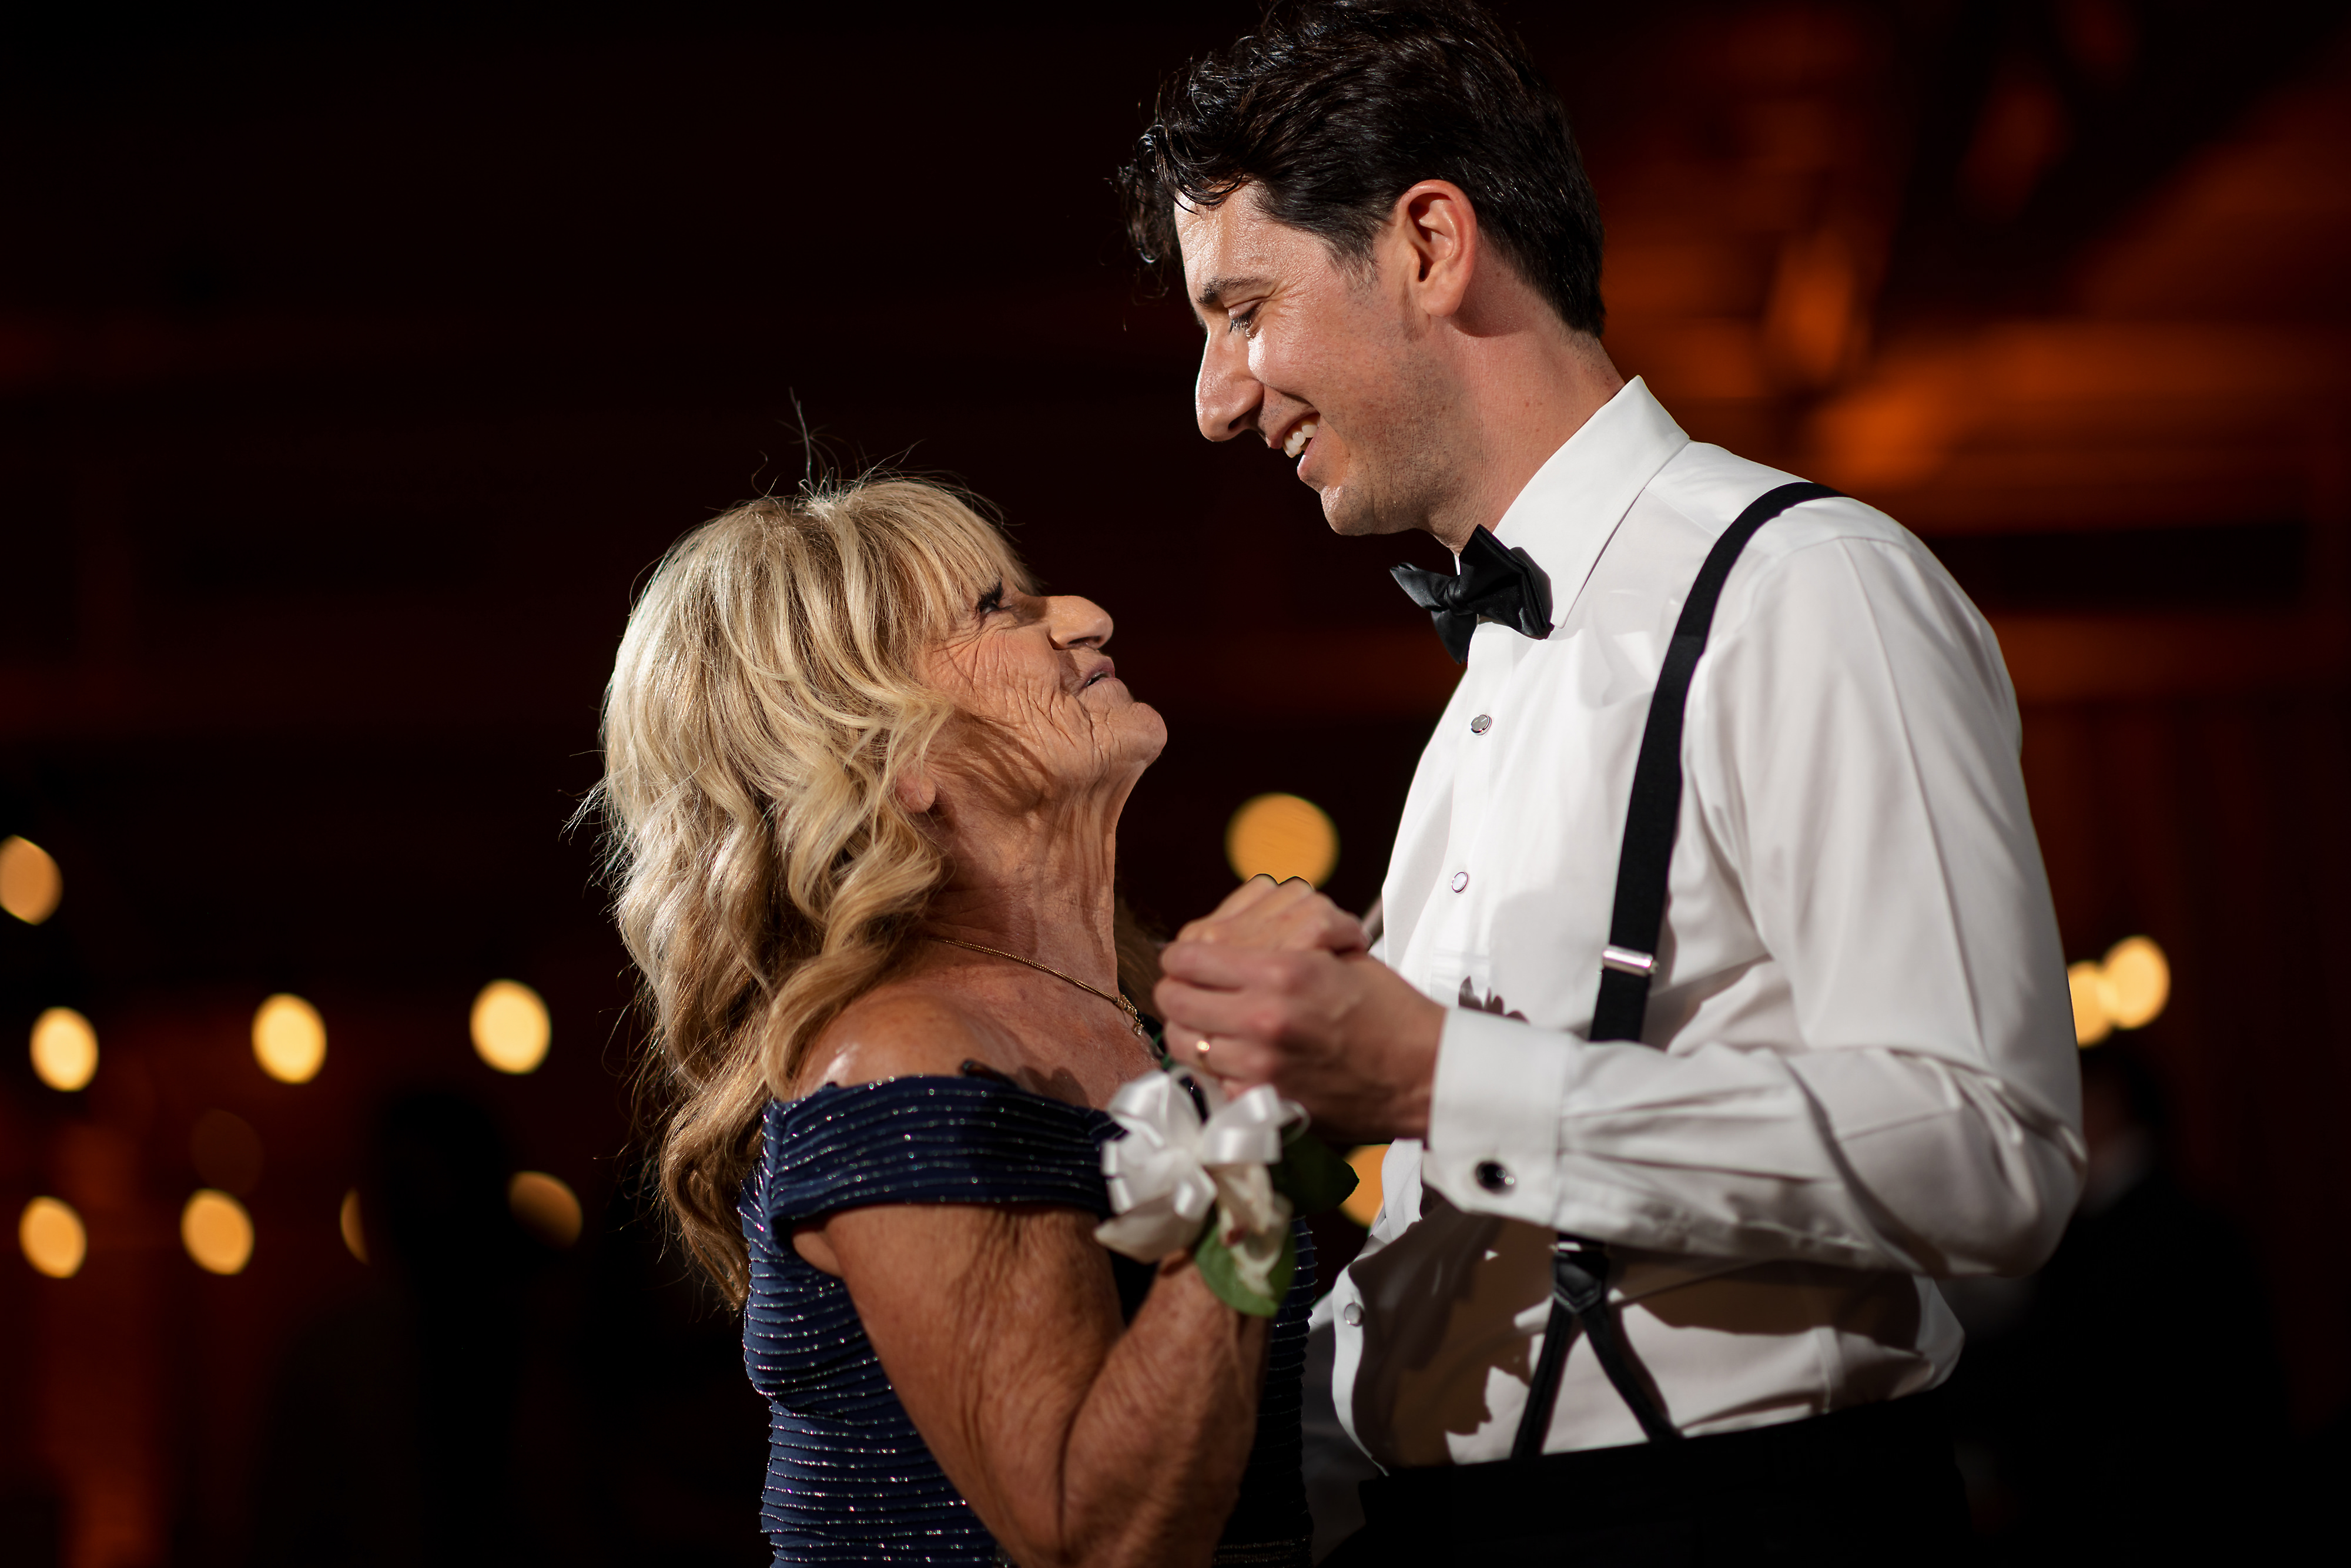 groom first dance with mother during wedding reception at Sarabande in Chicago